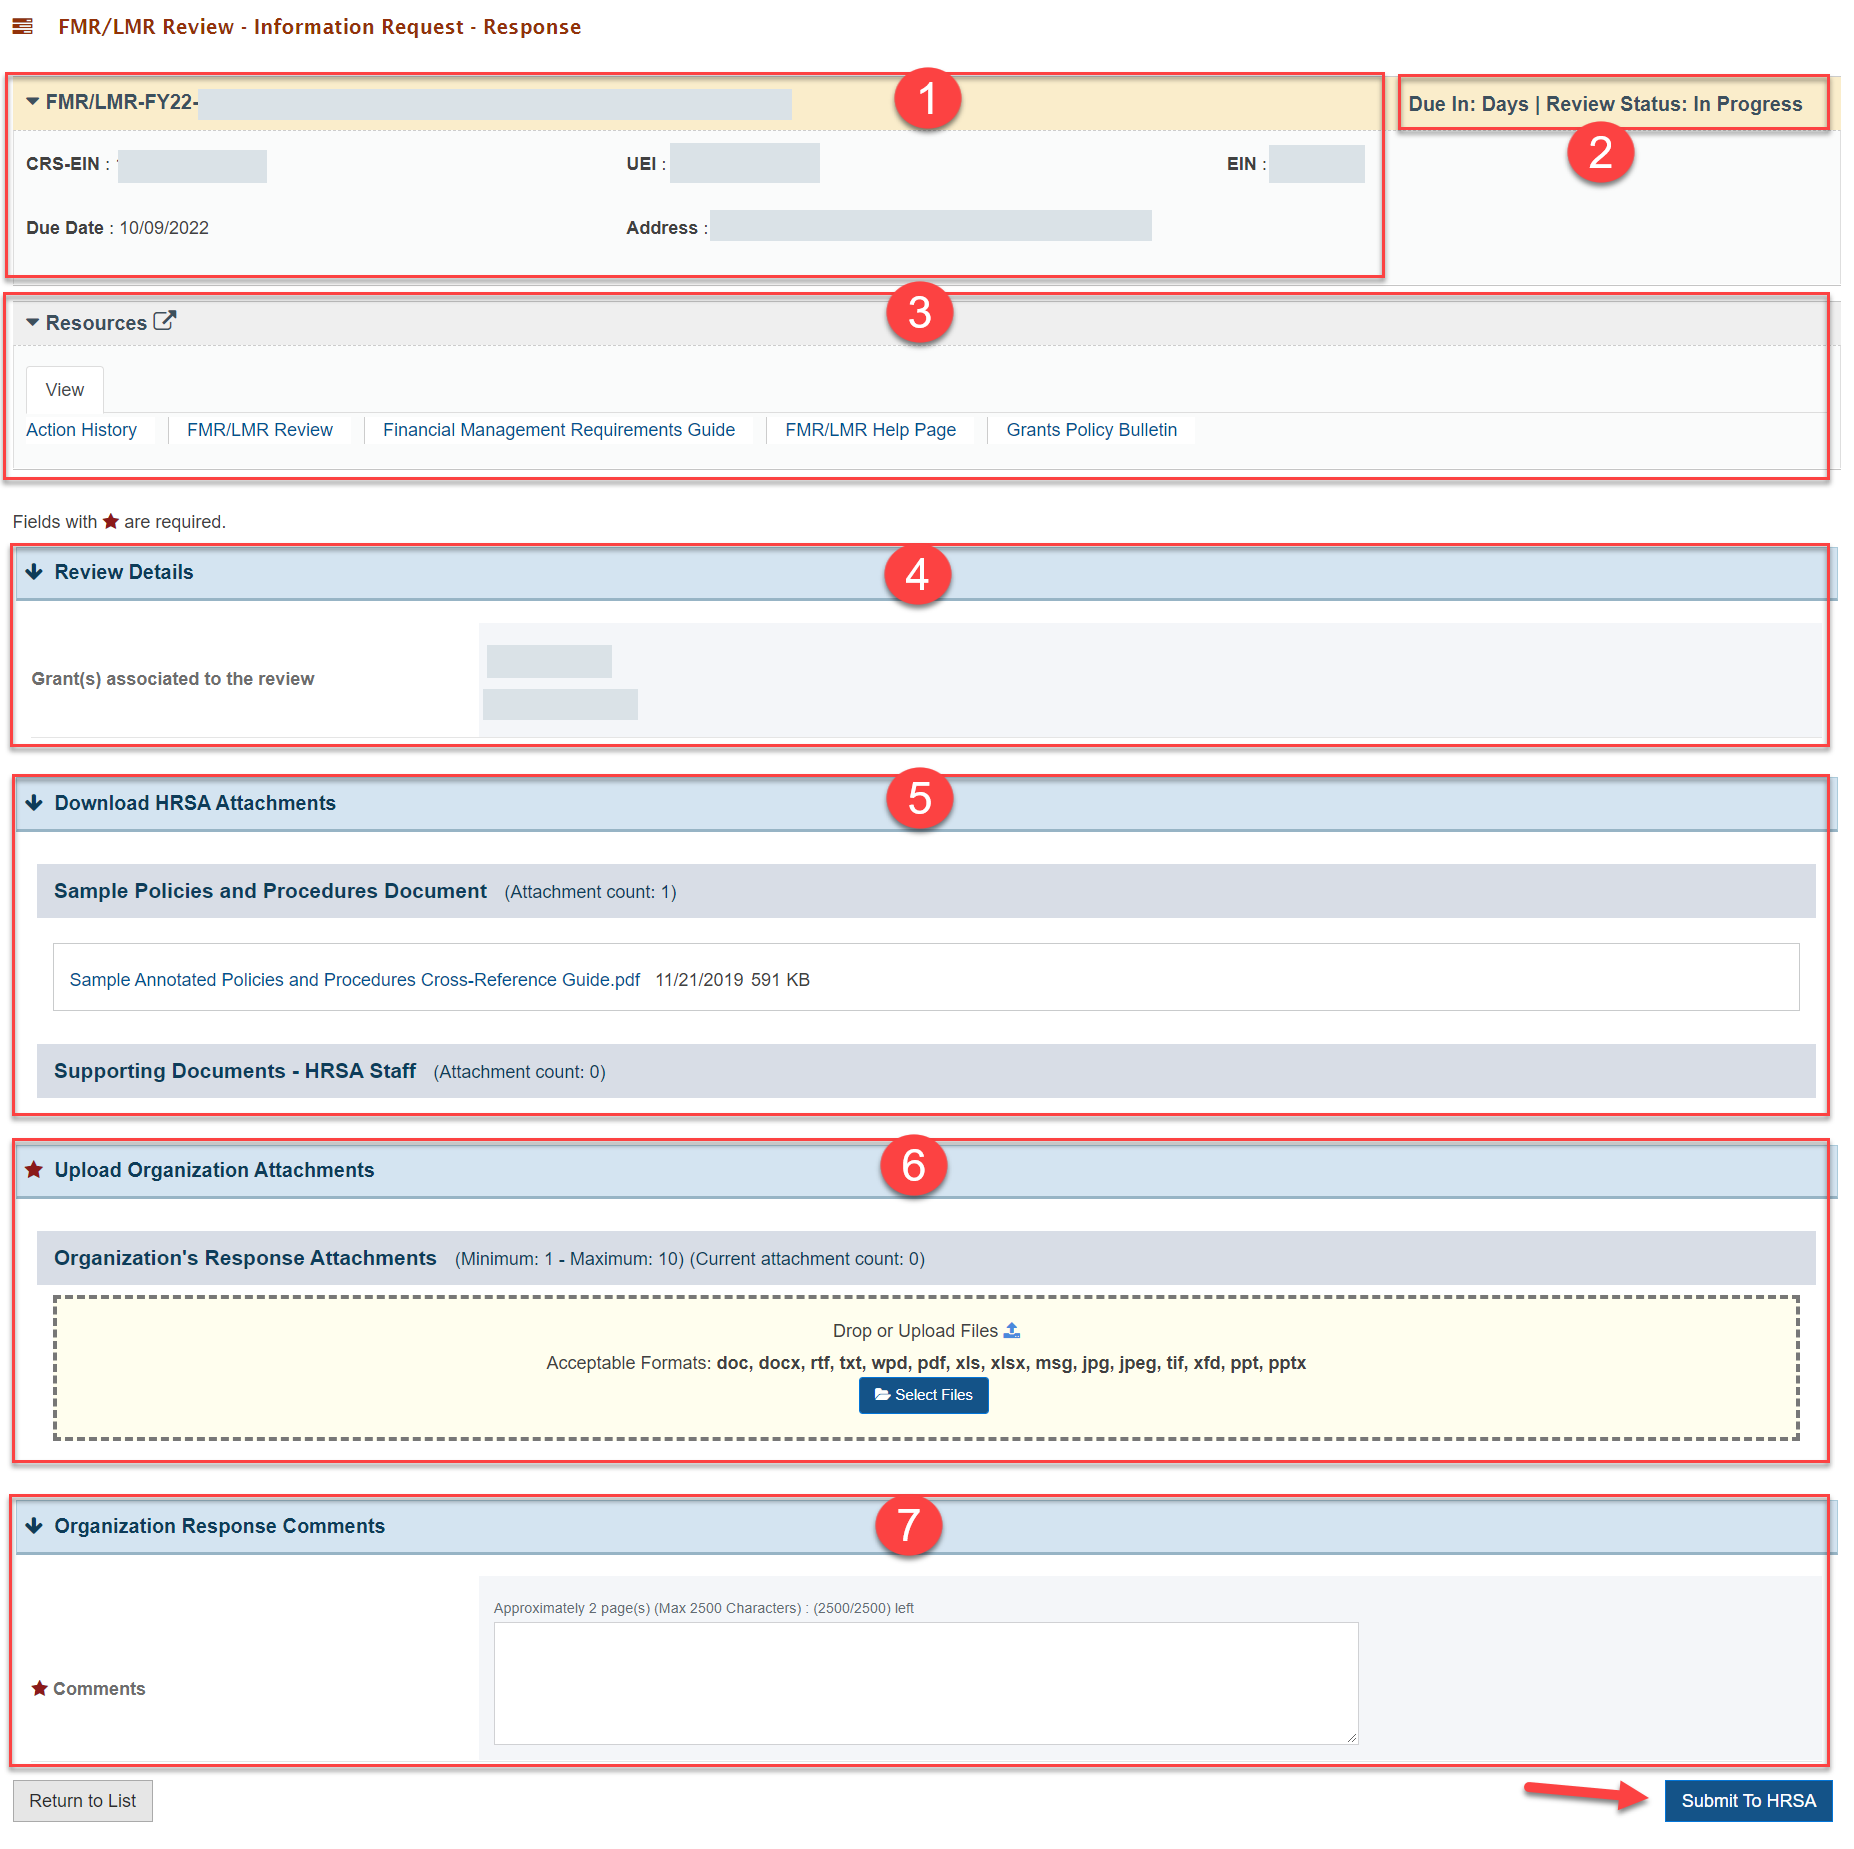 Screenshot of the FMR LMR Review Information Request Review page